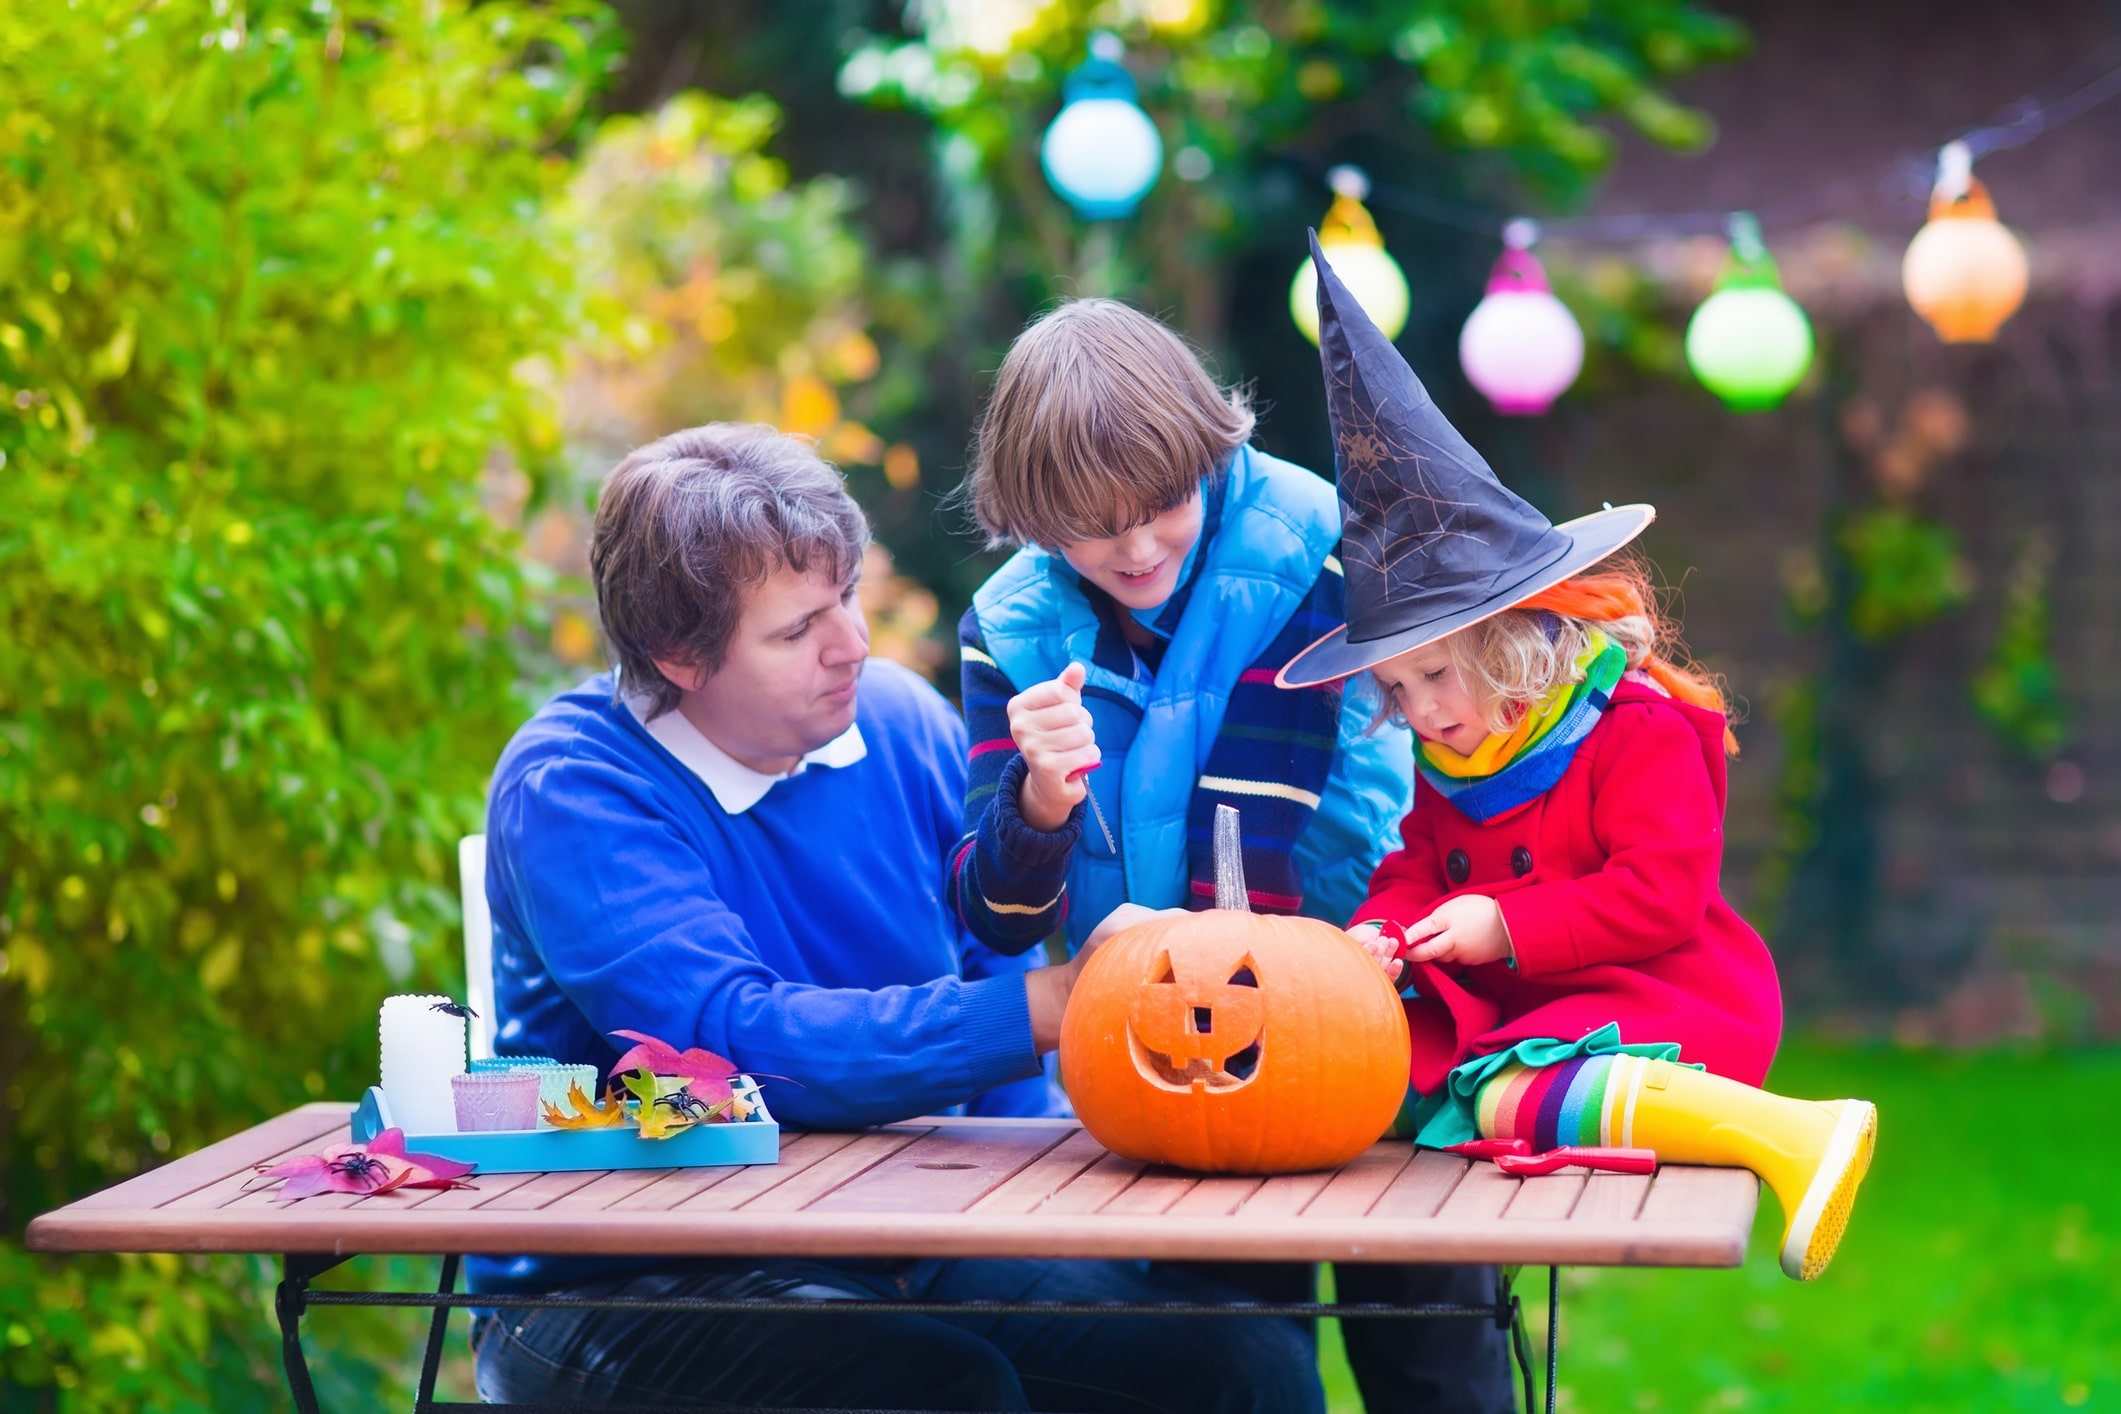 host a perfectly spooky backyard Halloween party